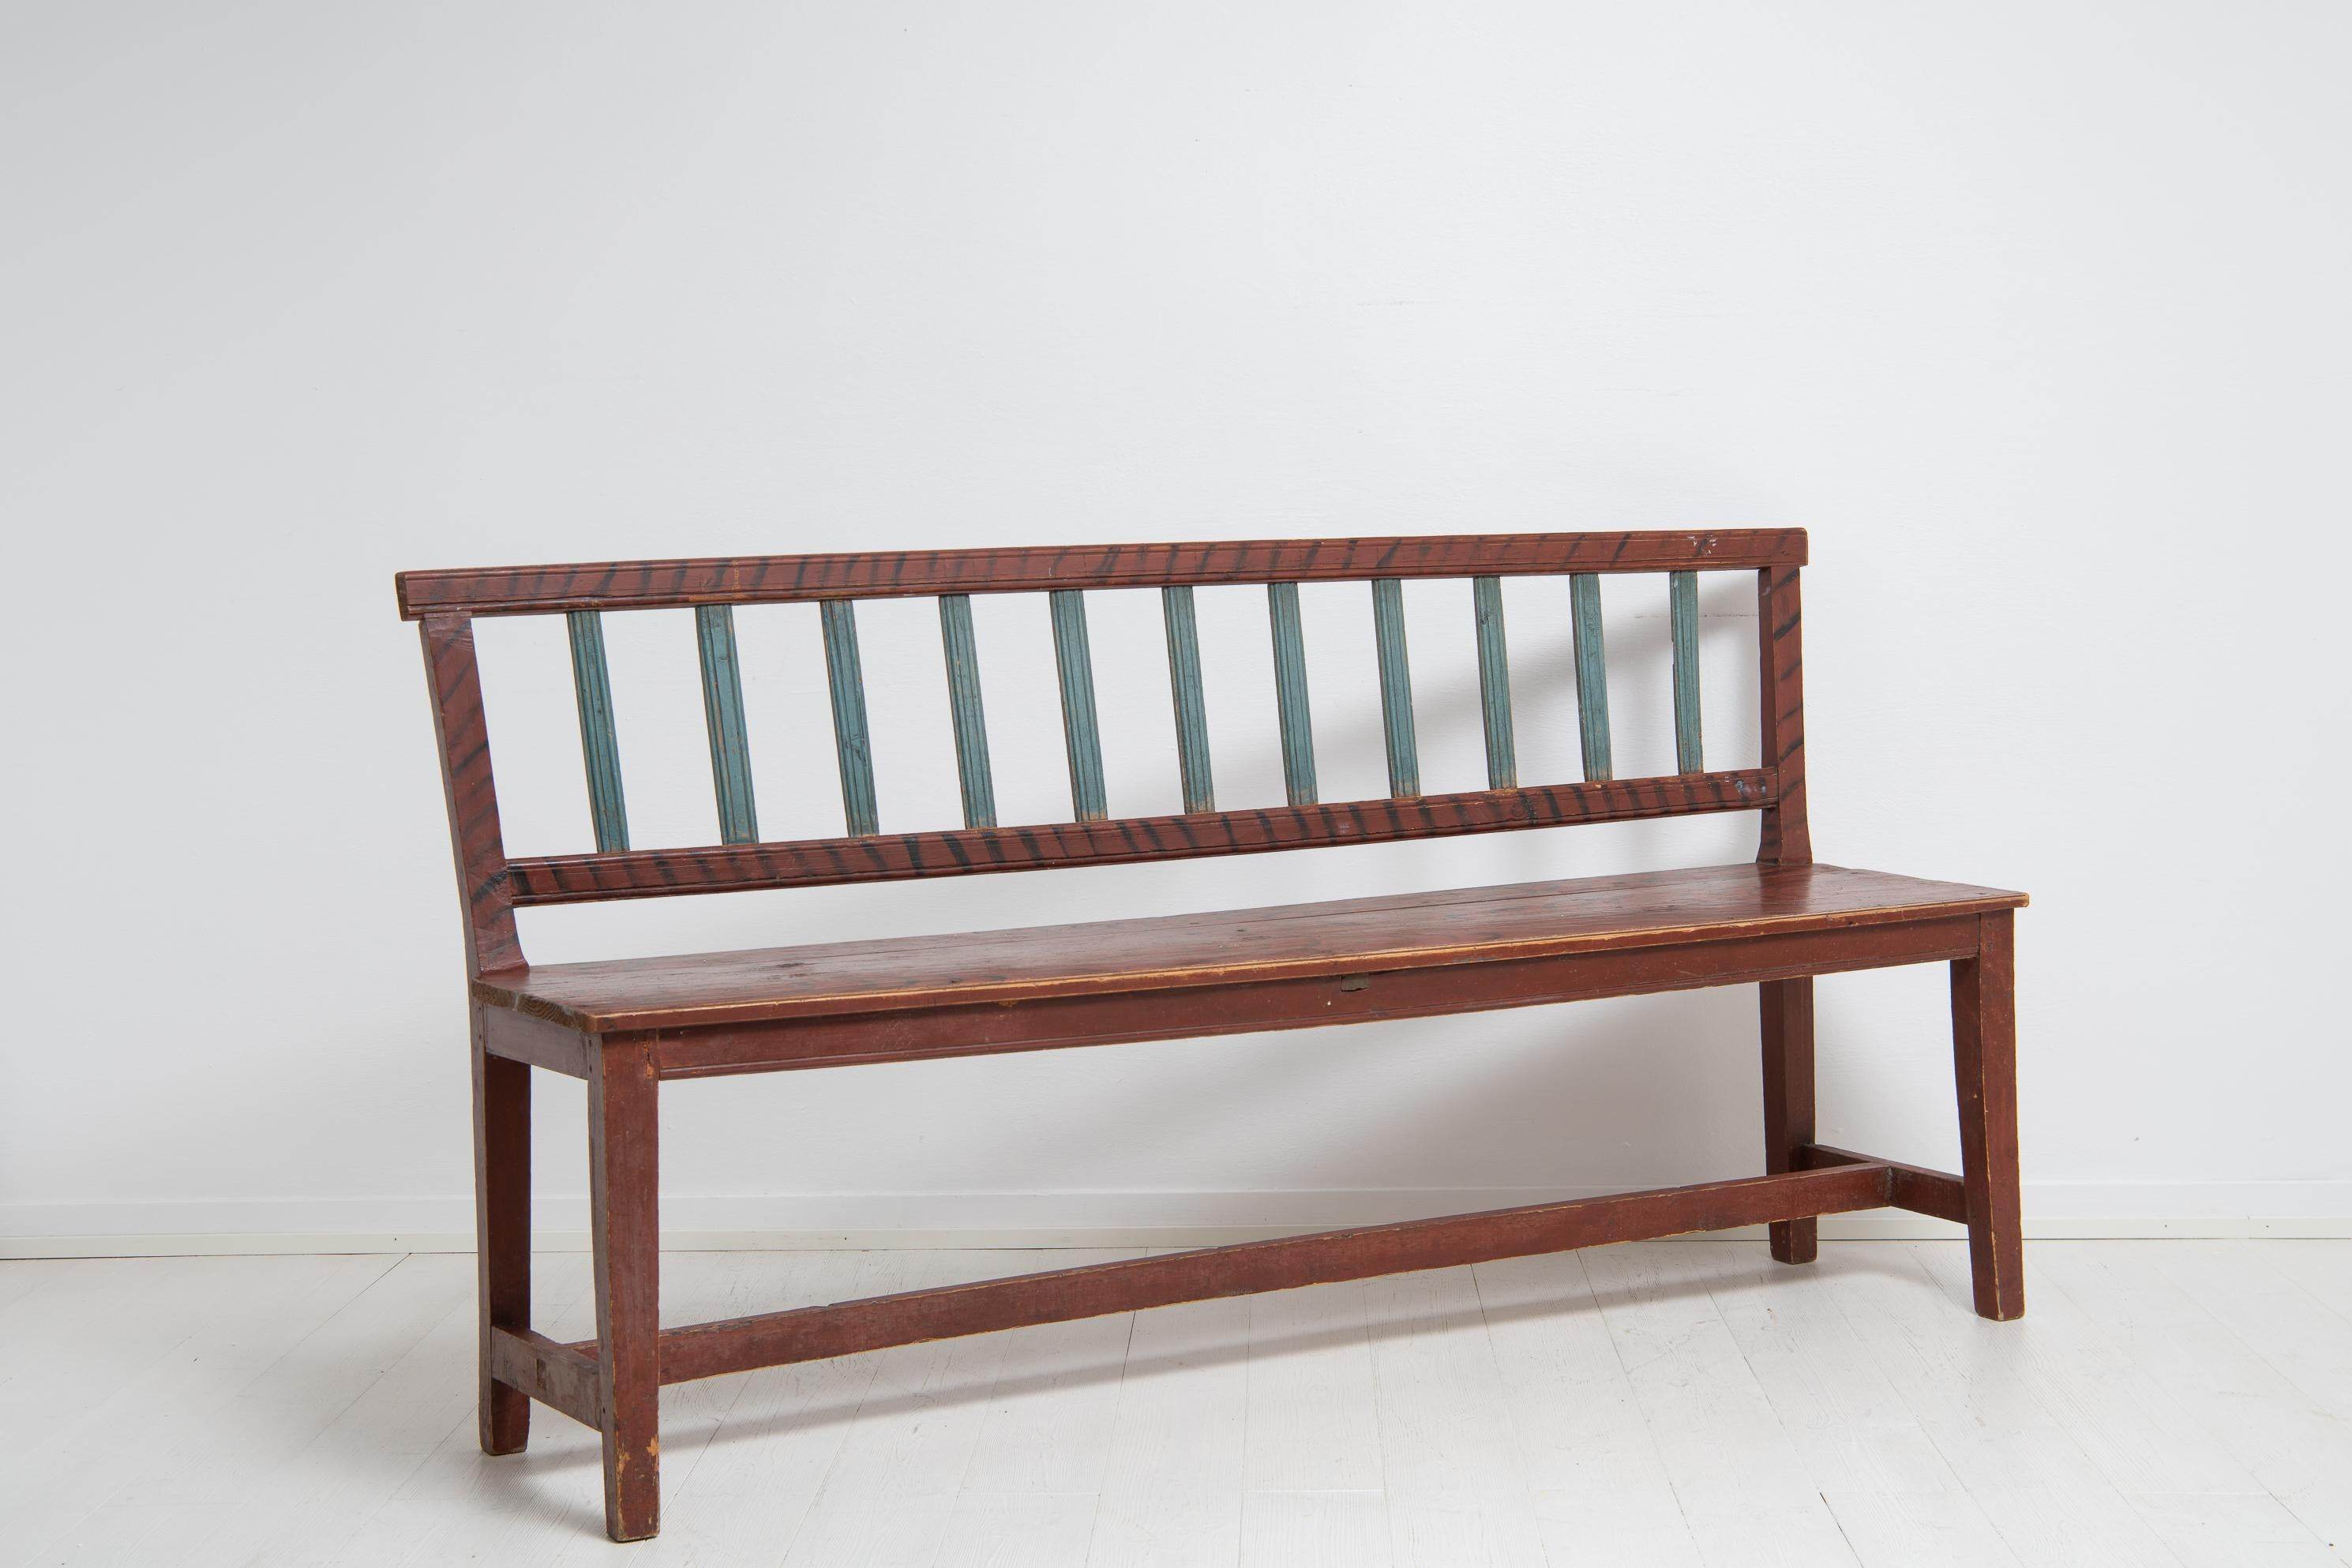 Swedish gustavian country sofa or bench from the early 19th century. The sofa is a country house furniture in folk art with an unusual straight shape. The sofa has profiled or fluted ribs in the backrest and all original paint. The red paint has